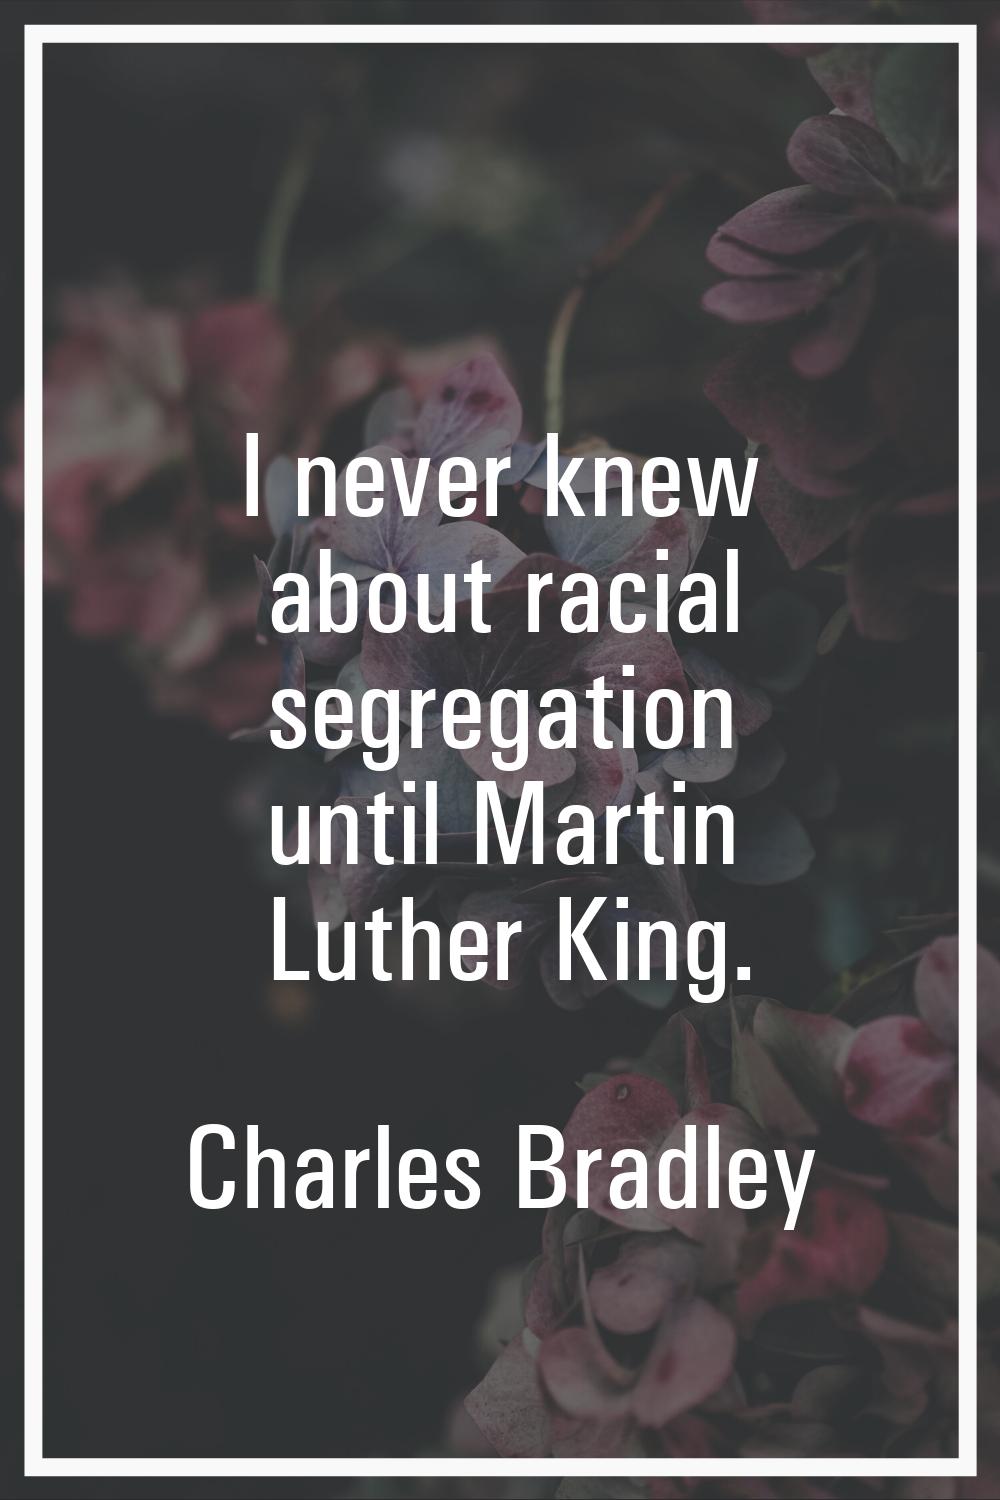 I never knew about racial segregation until Martin Luther King.